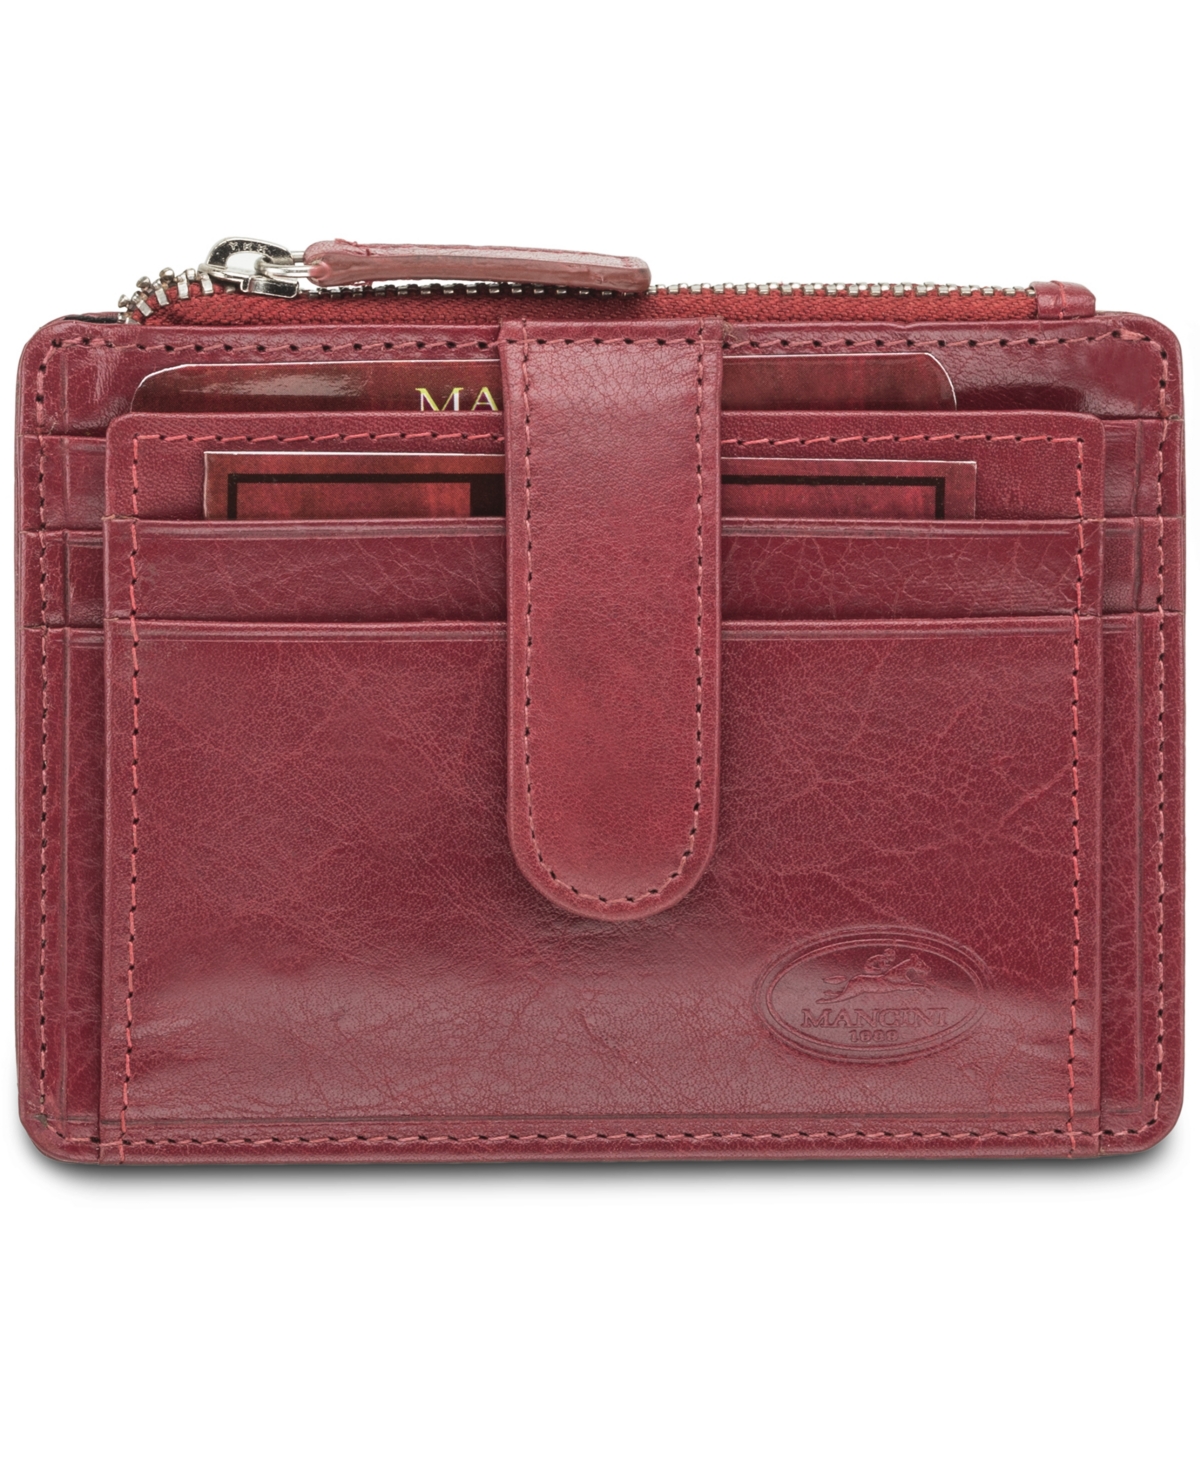 Men's Mancini Equestrian2 Collection Rfid Secure Card Case and Coin Pocket - Red